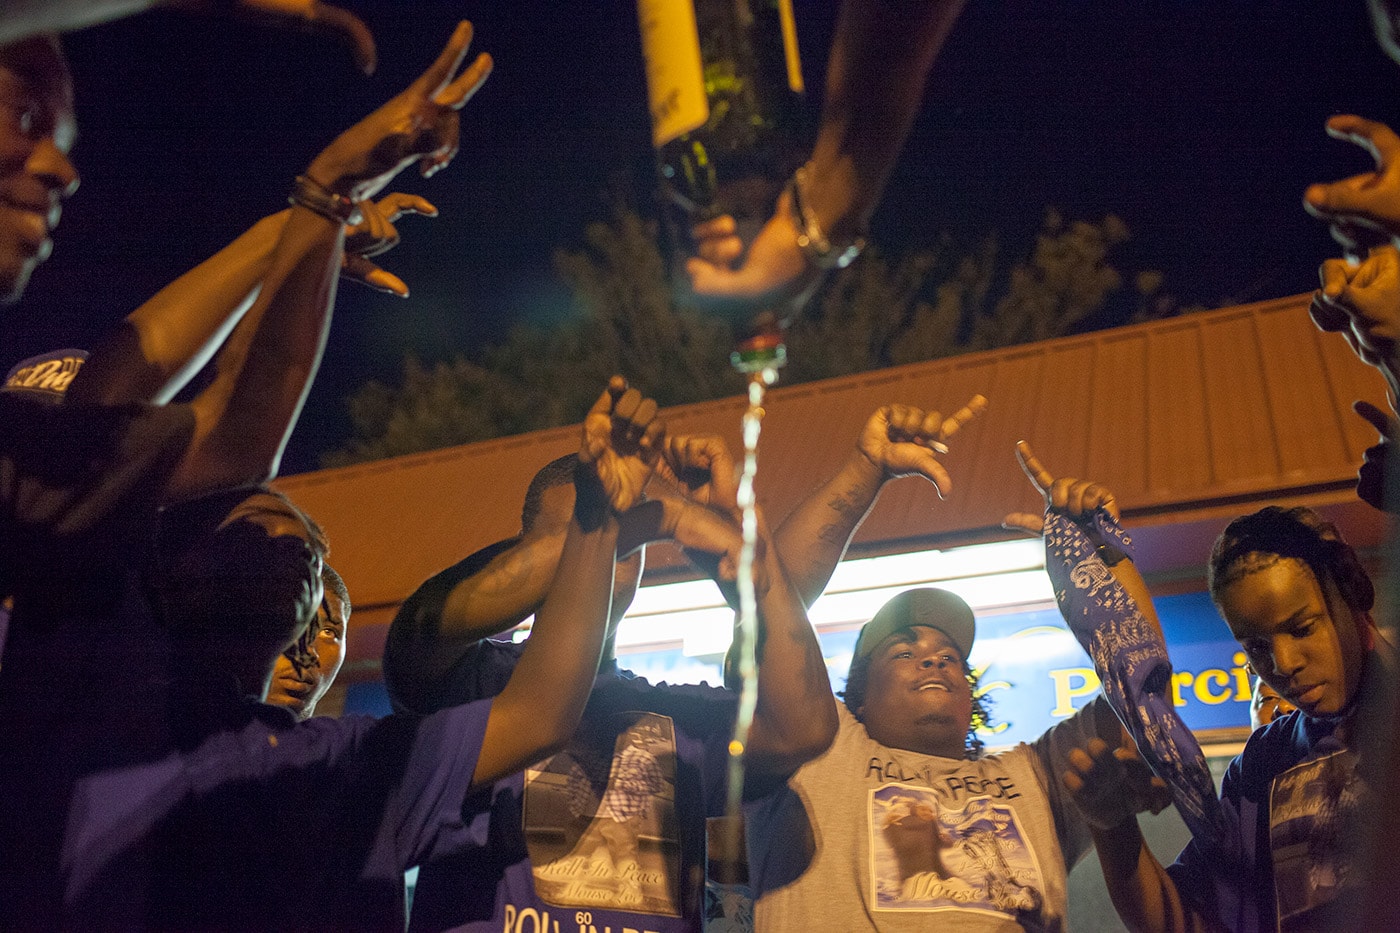 Young men who identify as Crips gather in a circle and spill liquor to mourn Maurice Streeter, who was shot and killed in April 2013.